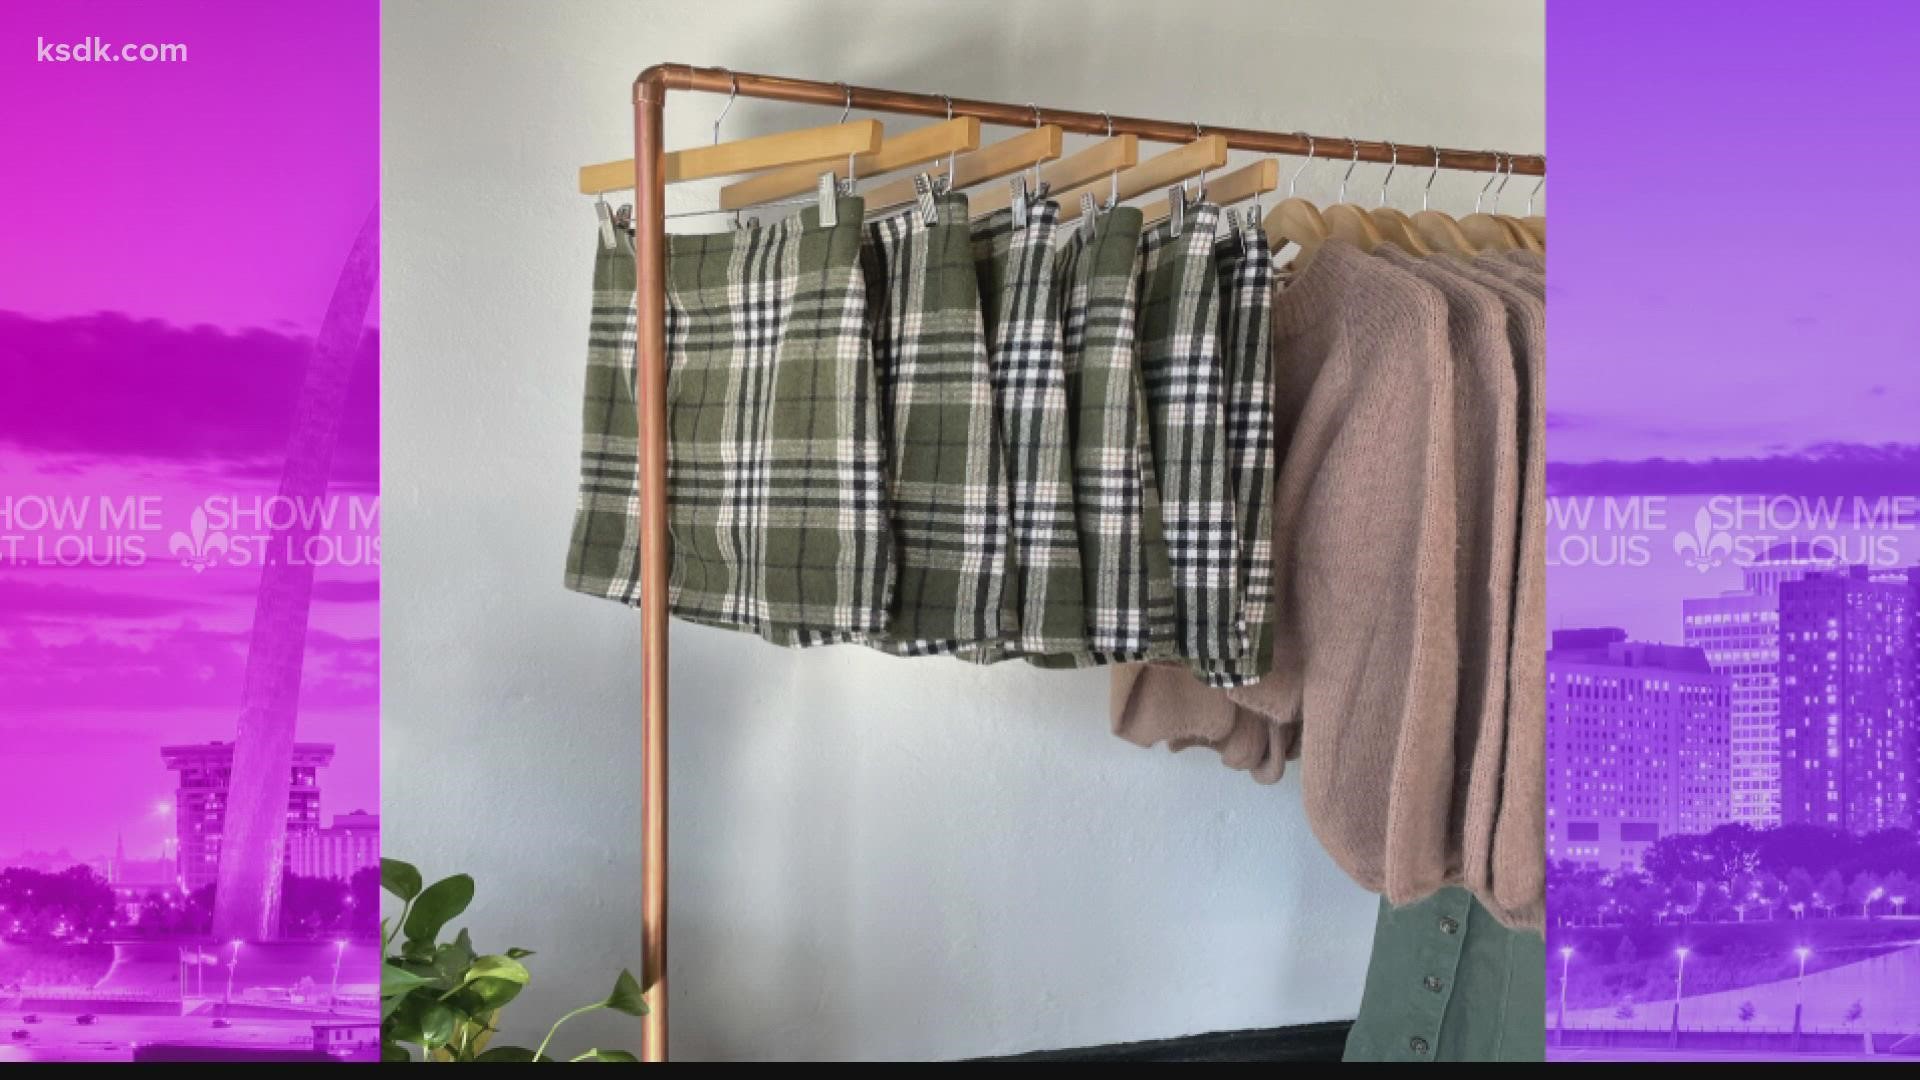 A women’s clothing boutique that focuses on sustainability